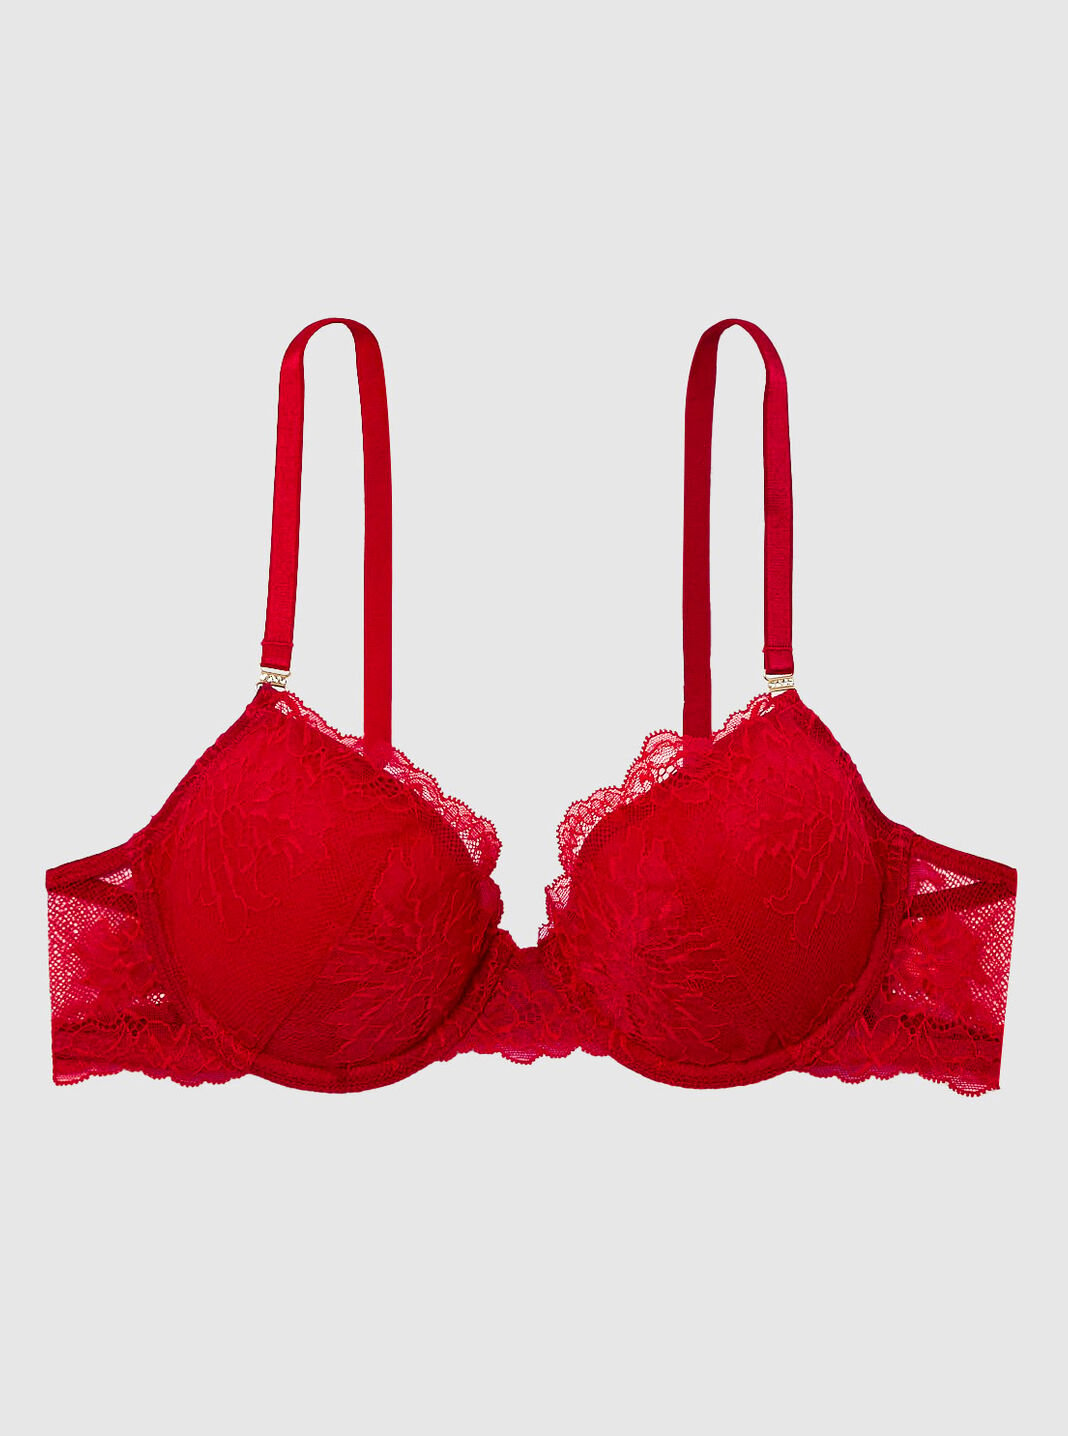 The Spacer Bra Collection, Demi Bras